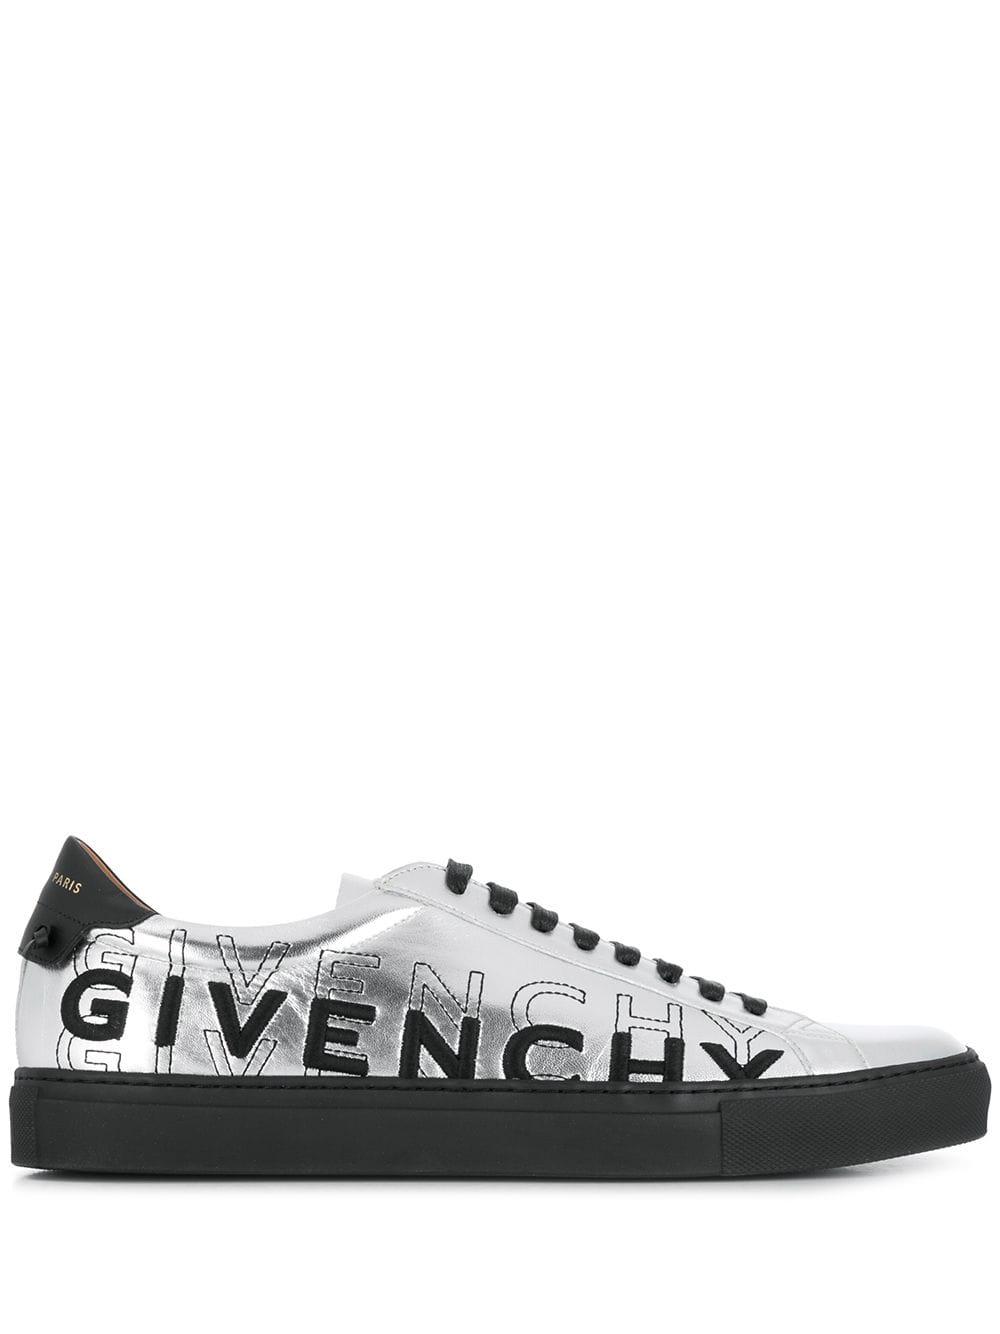 Givenchy Leather Lace Up Sneakers in 